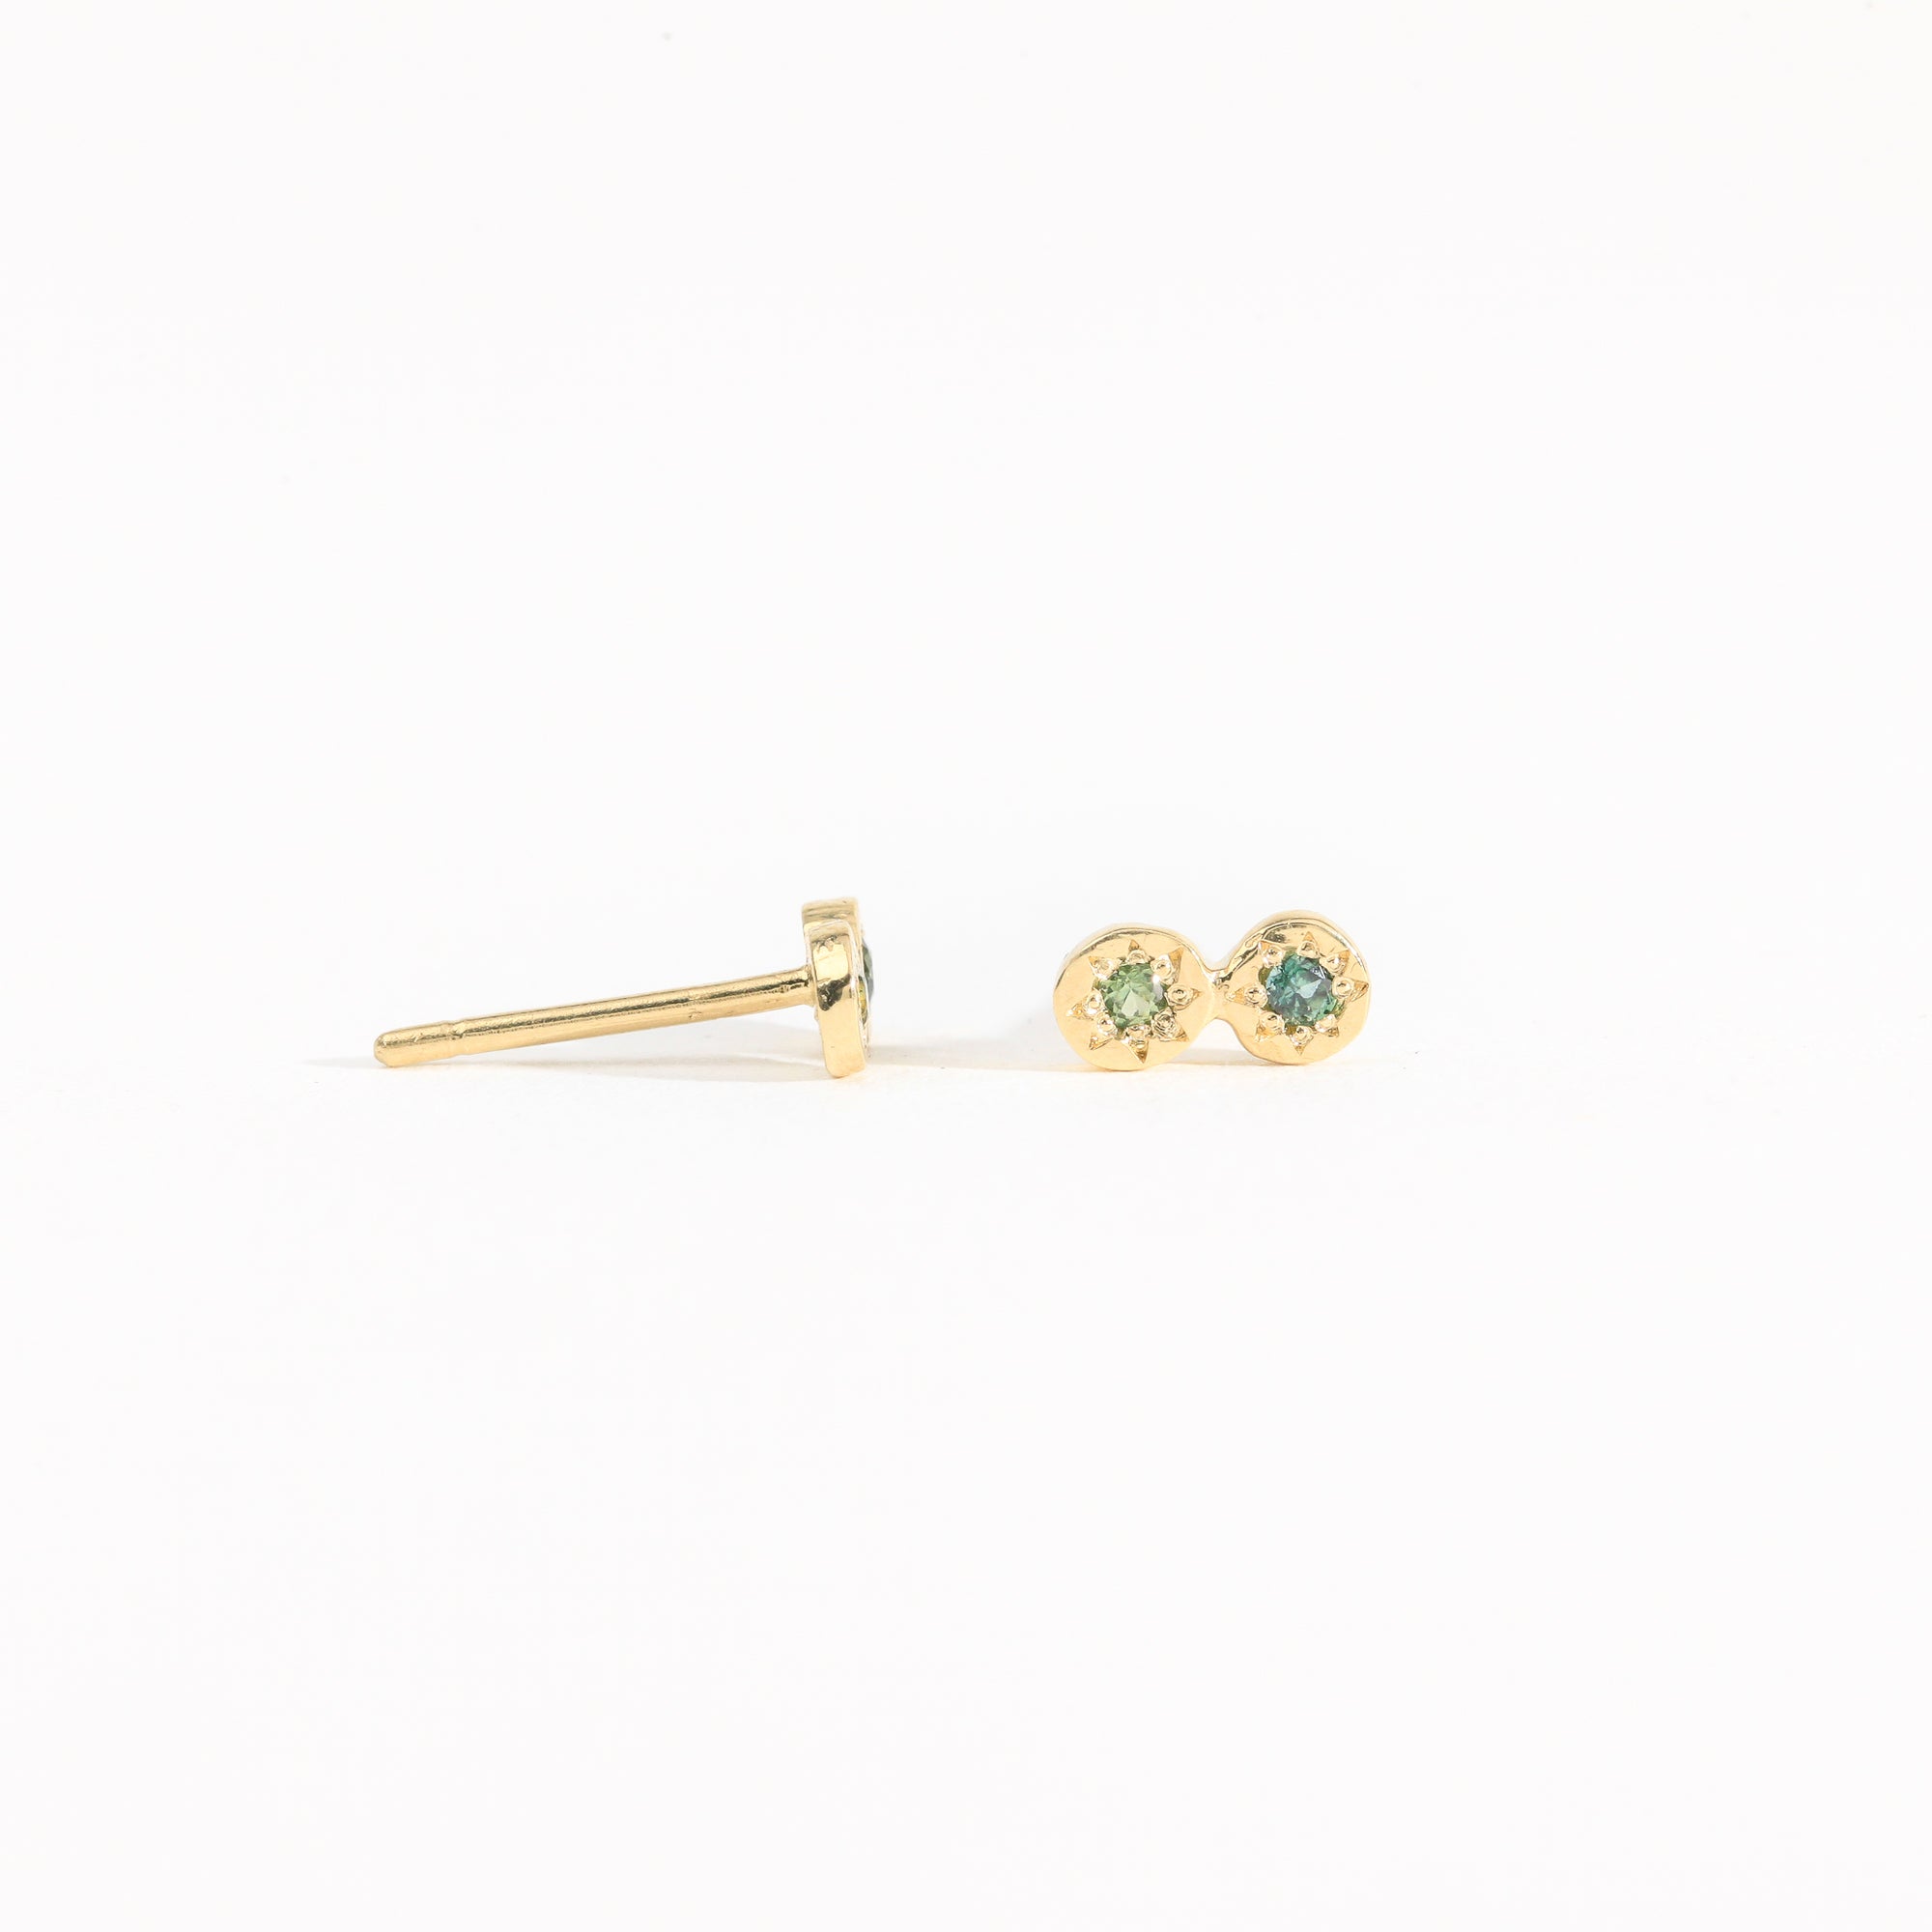 Petite two stone earrings with ethically sourced Australian sapphires crafted in yellow gold by Black Finch